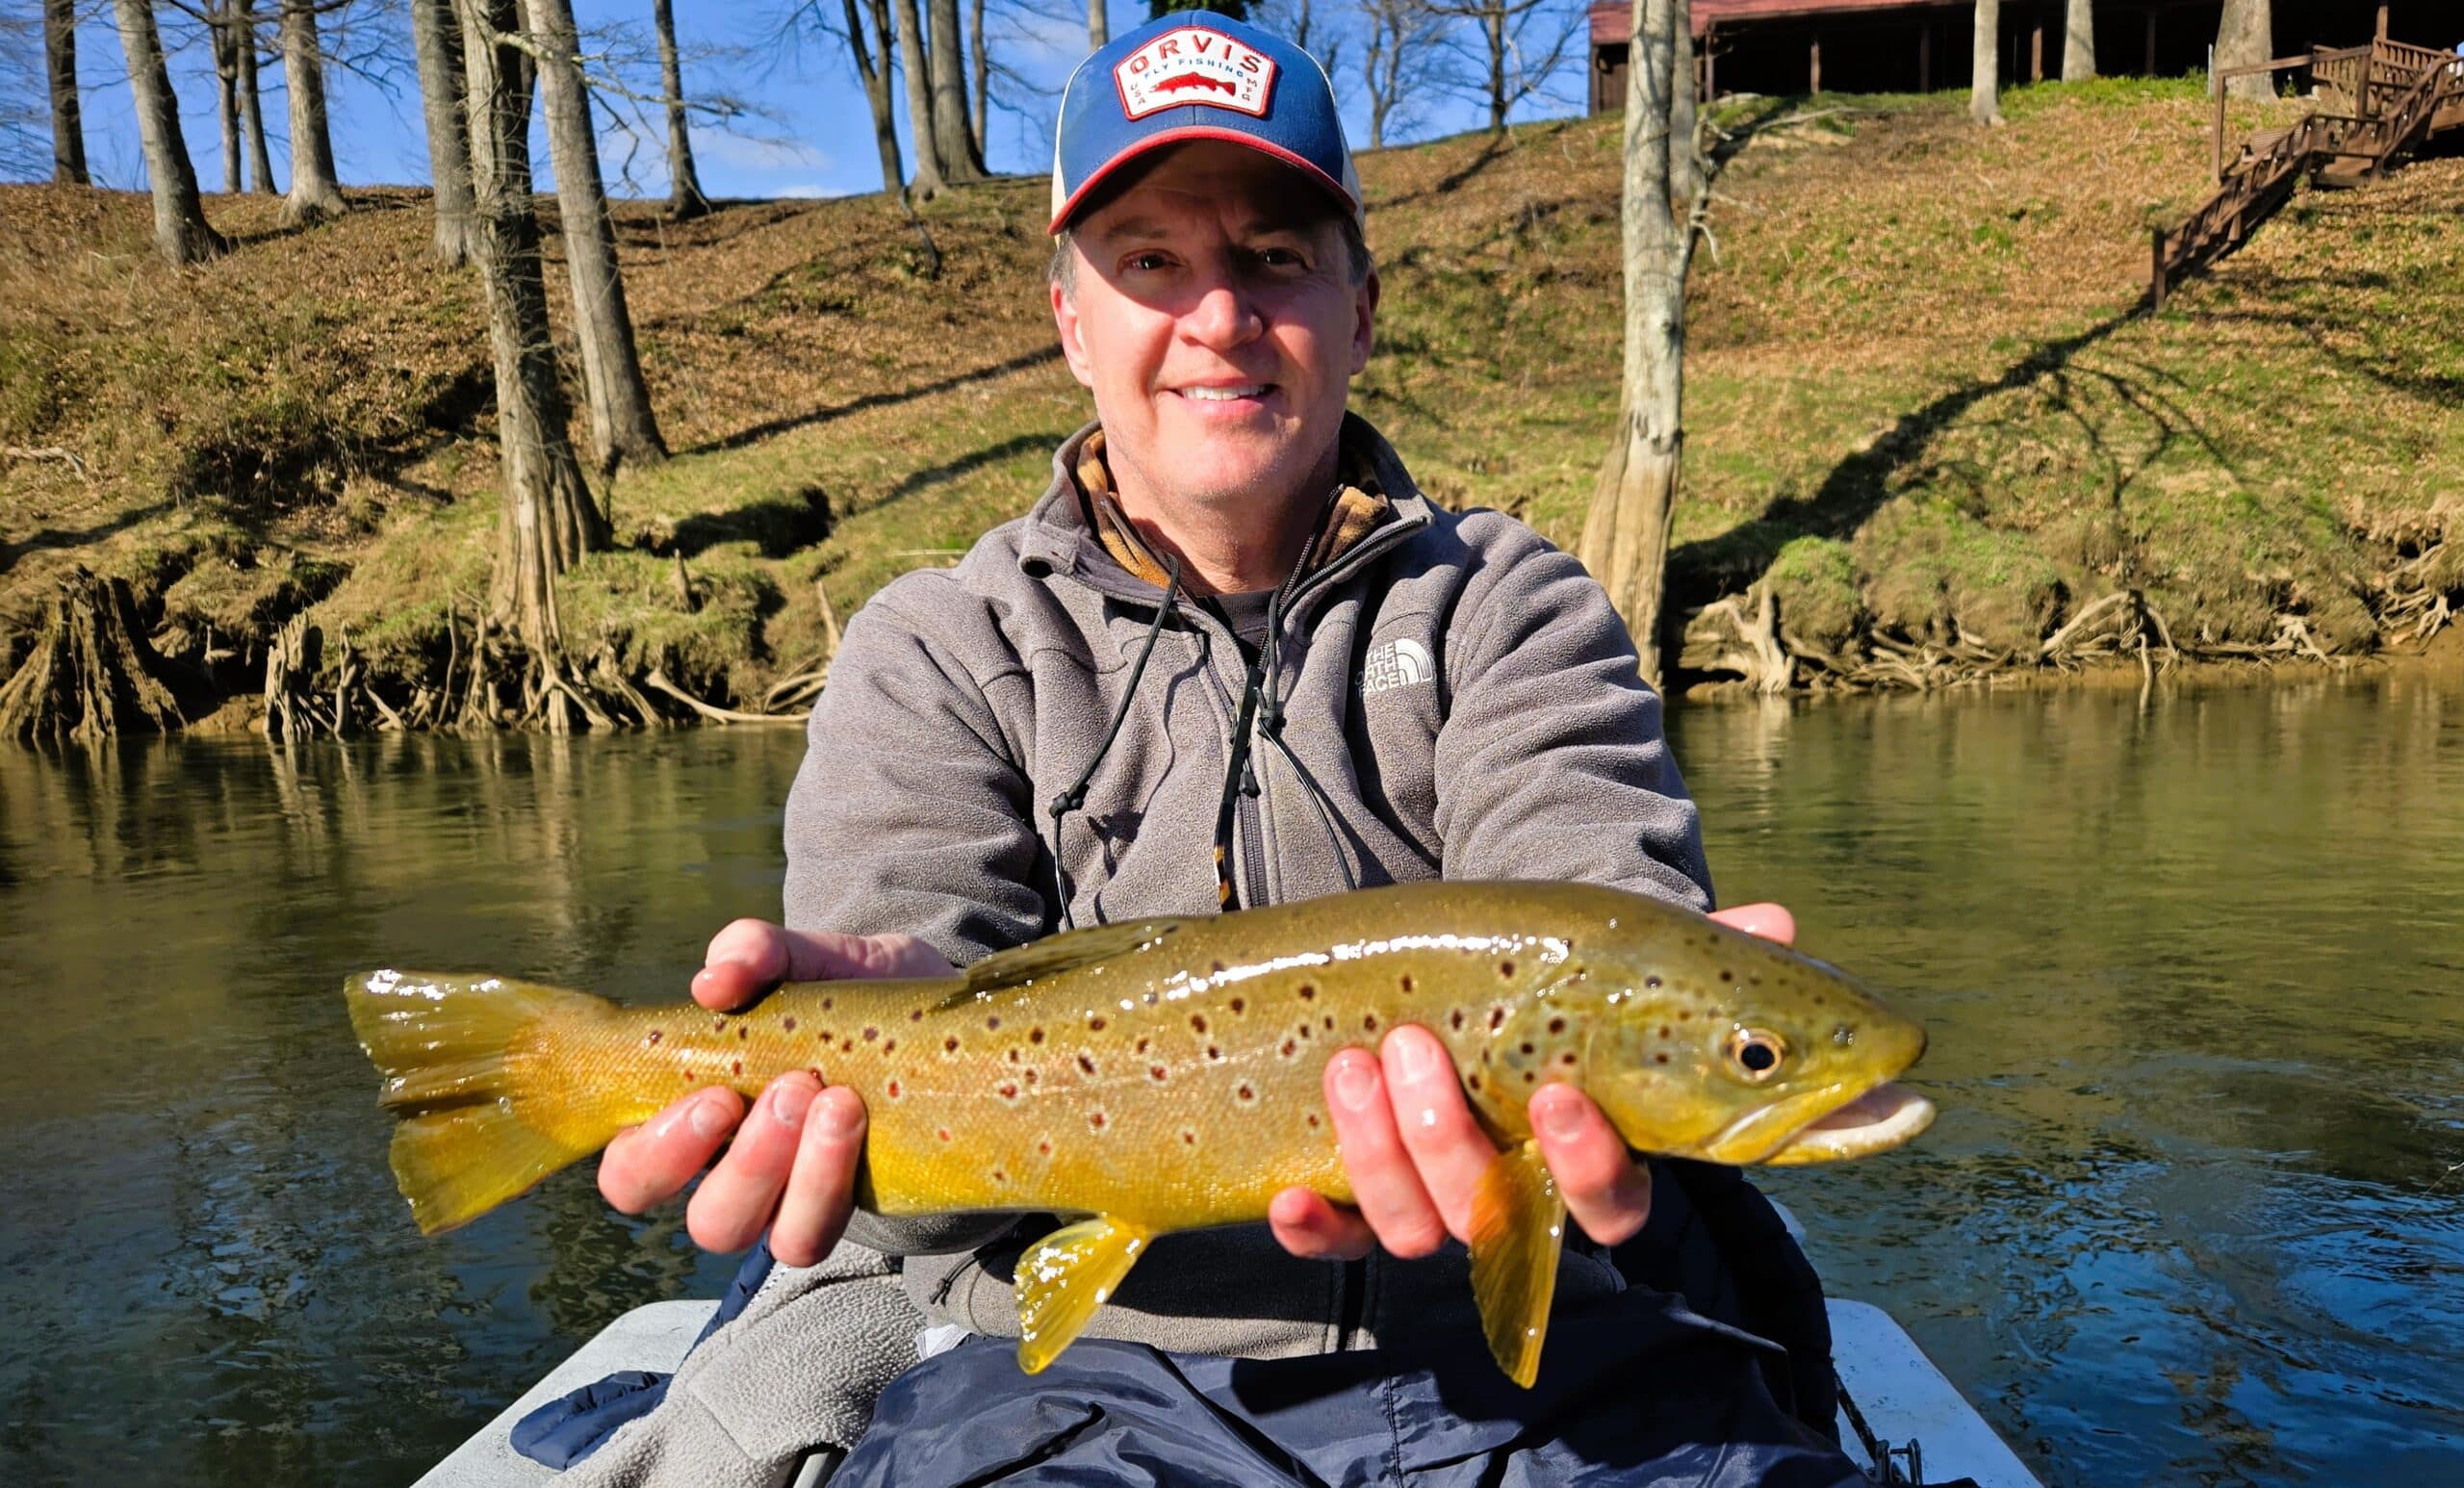 Caught this beautiful brown trout by accident. I think there are bigger  ones where I caught this. What lures/bait would you use in a reservoir for  rainbow/brown trout that is predominantly dominated